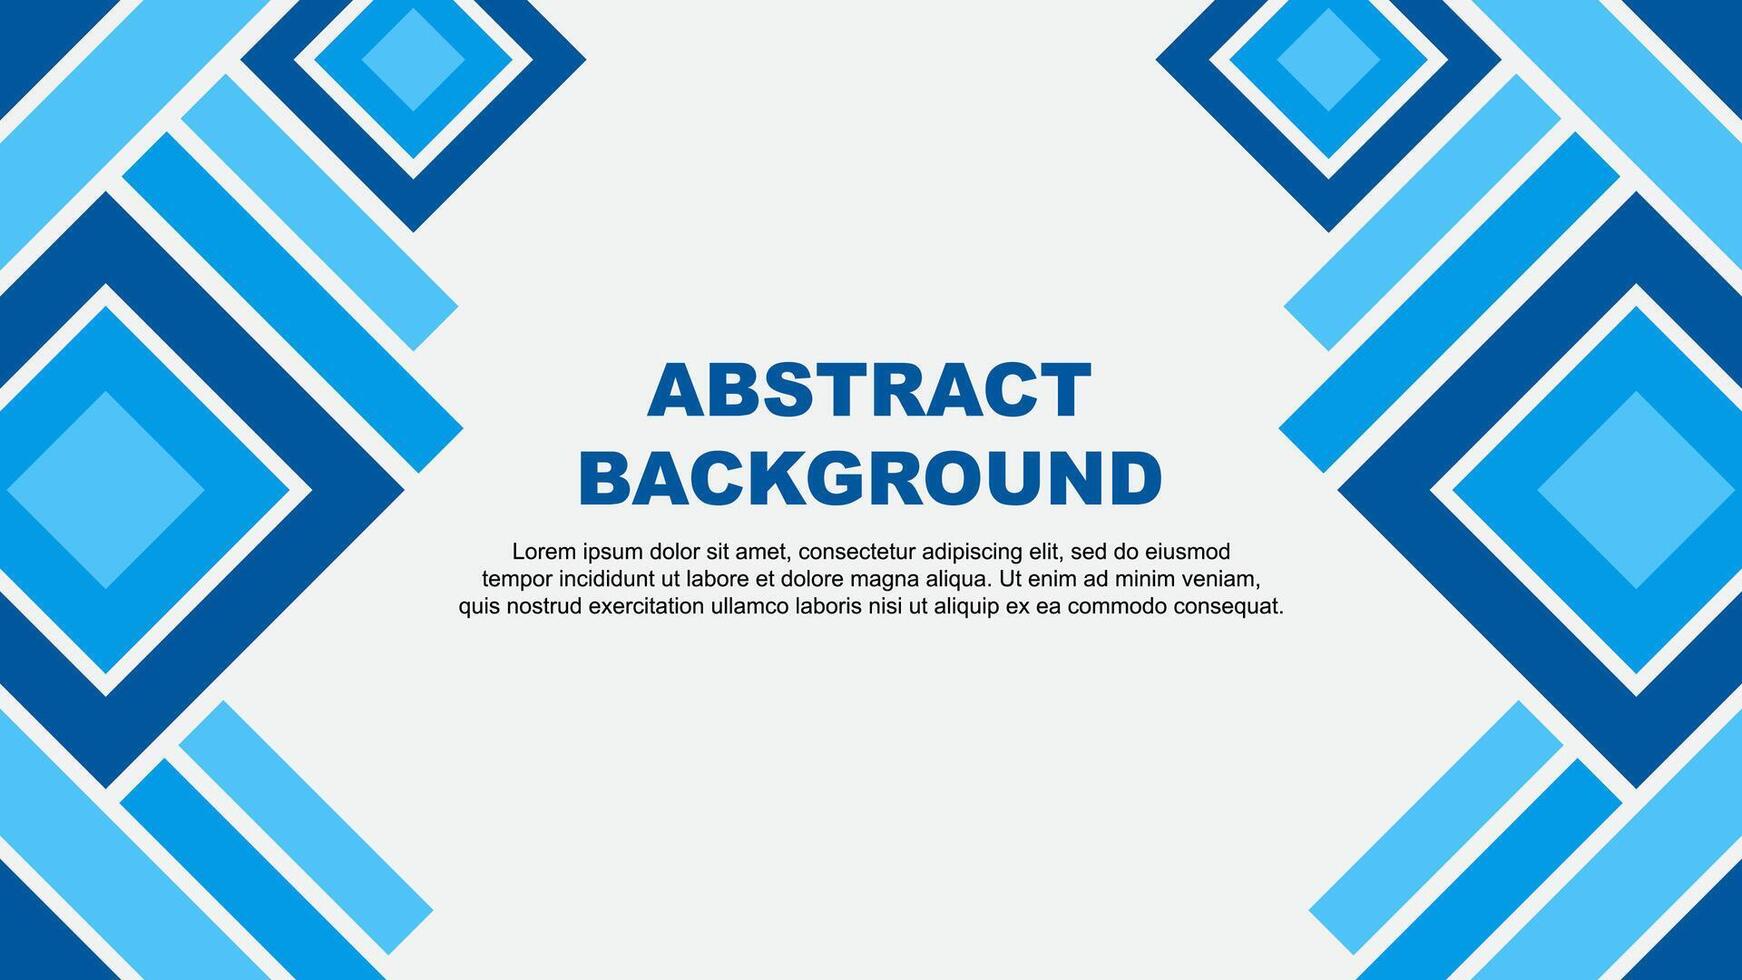 Abstract Cyan Background Design Template. Abstract Banner Wallpaper Illustration. Abstract Cyan vector